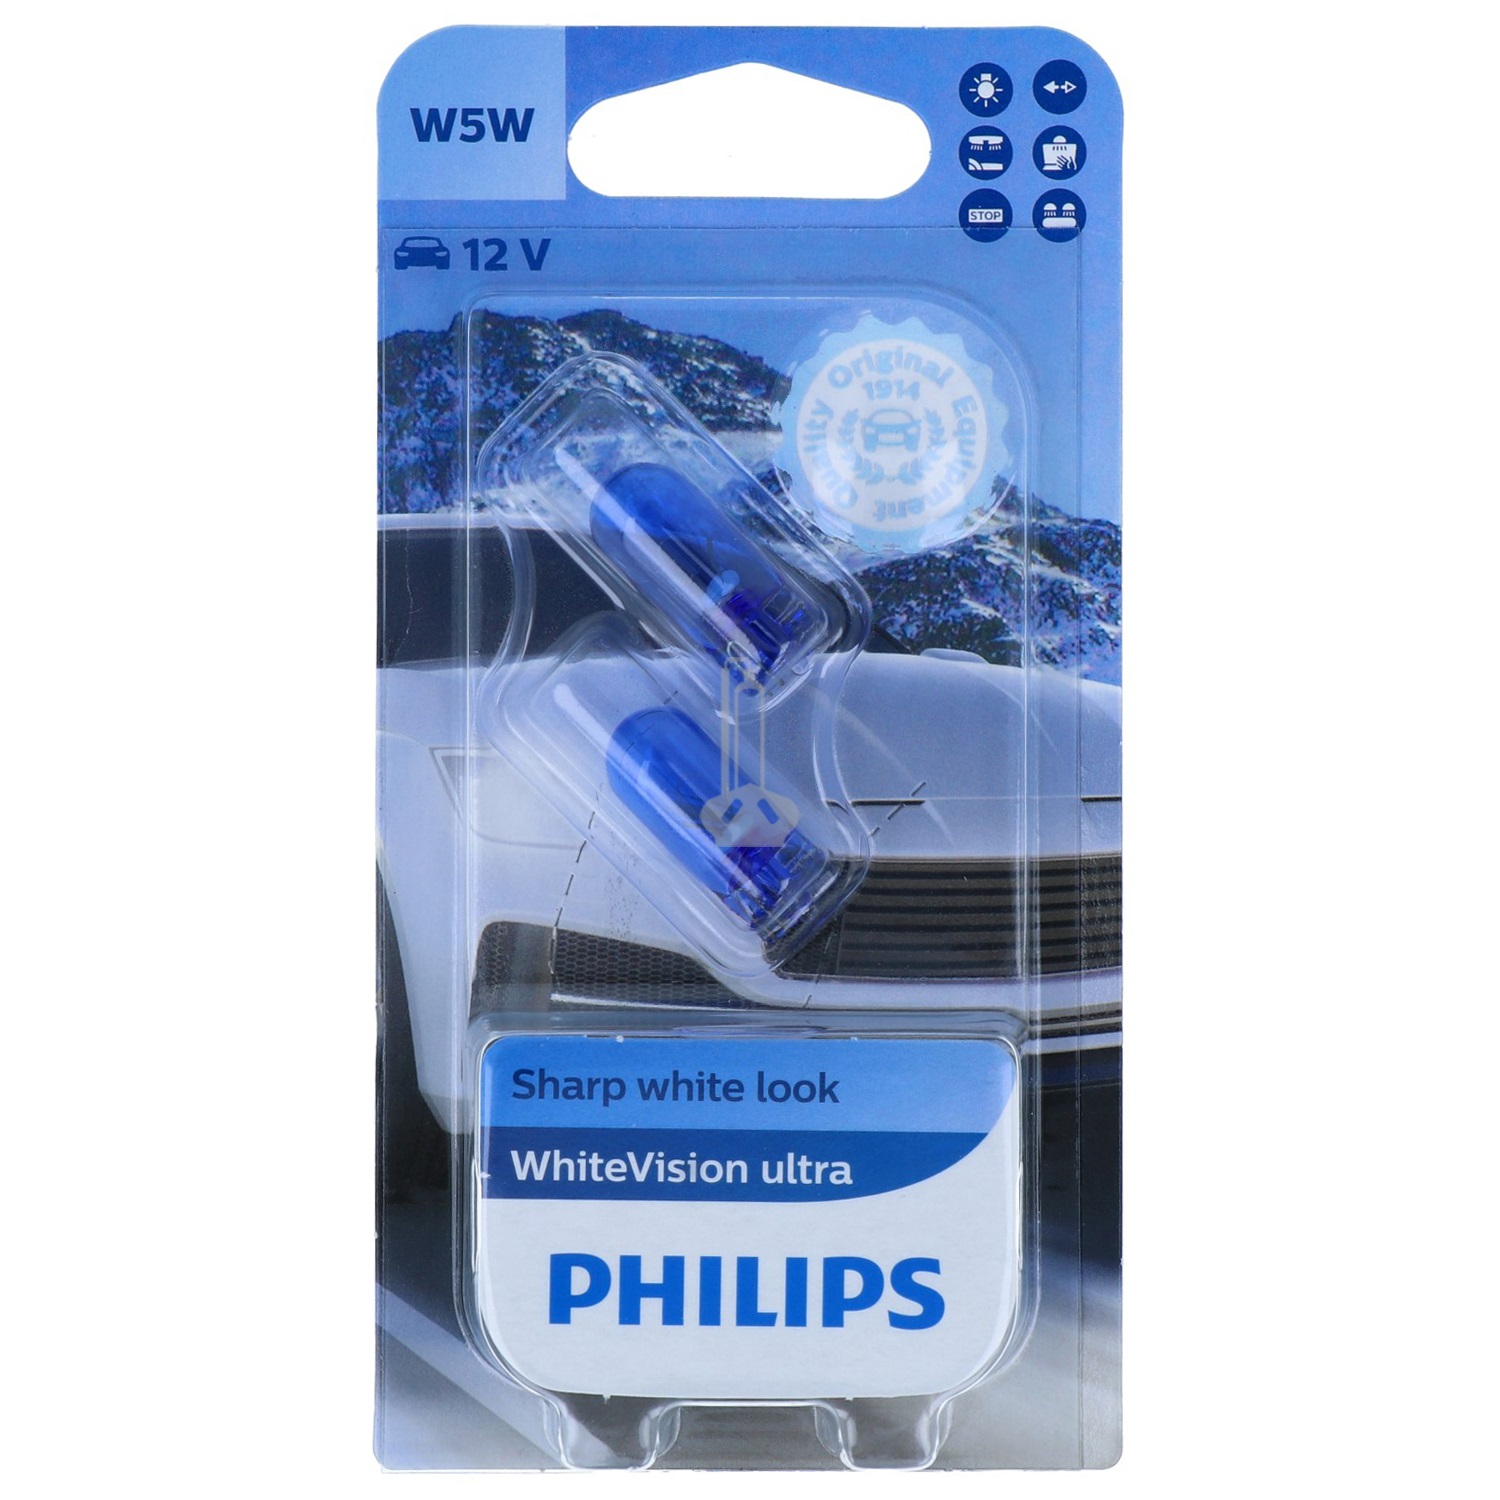 PHILIPS ampoule auto H1/W5W WhiteVision ultra, 12258WVUSM, 12 V 55